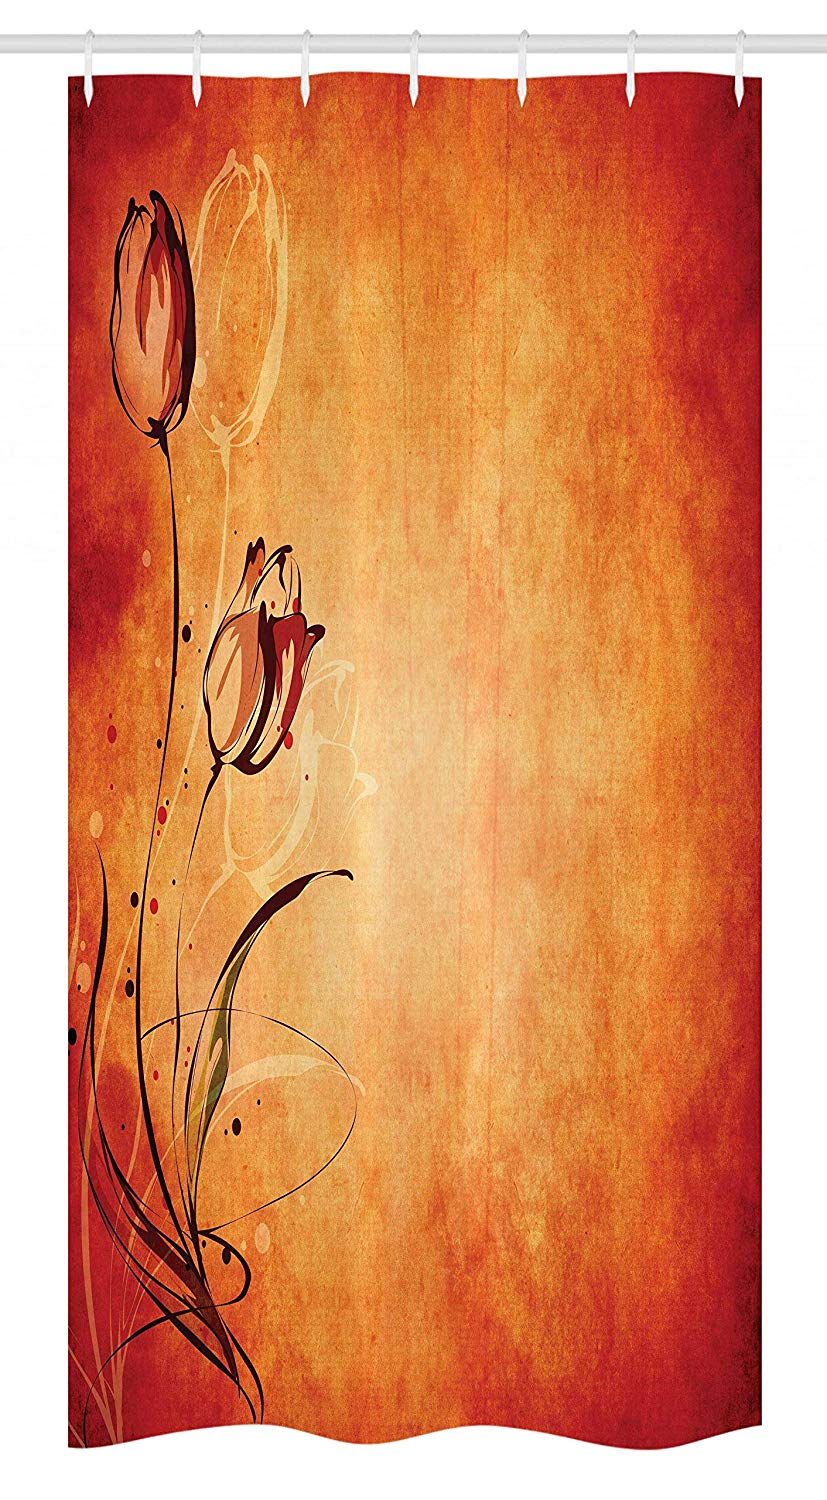 Ambesonne Antique Stall Shower Curtain, Vintage Aged Background with The Silhouette of Rose Bloom Digital Image, Fabric Bathroom Decor Set with Hooks, 36 W x 72 L Inches, Orange Mustard Maroon